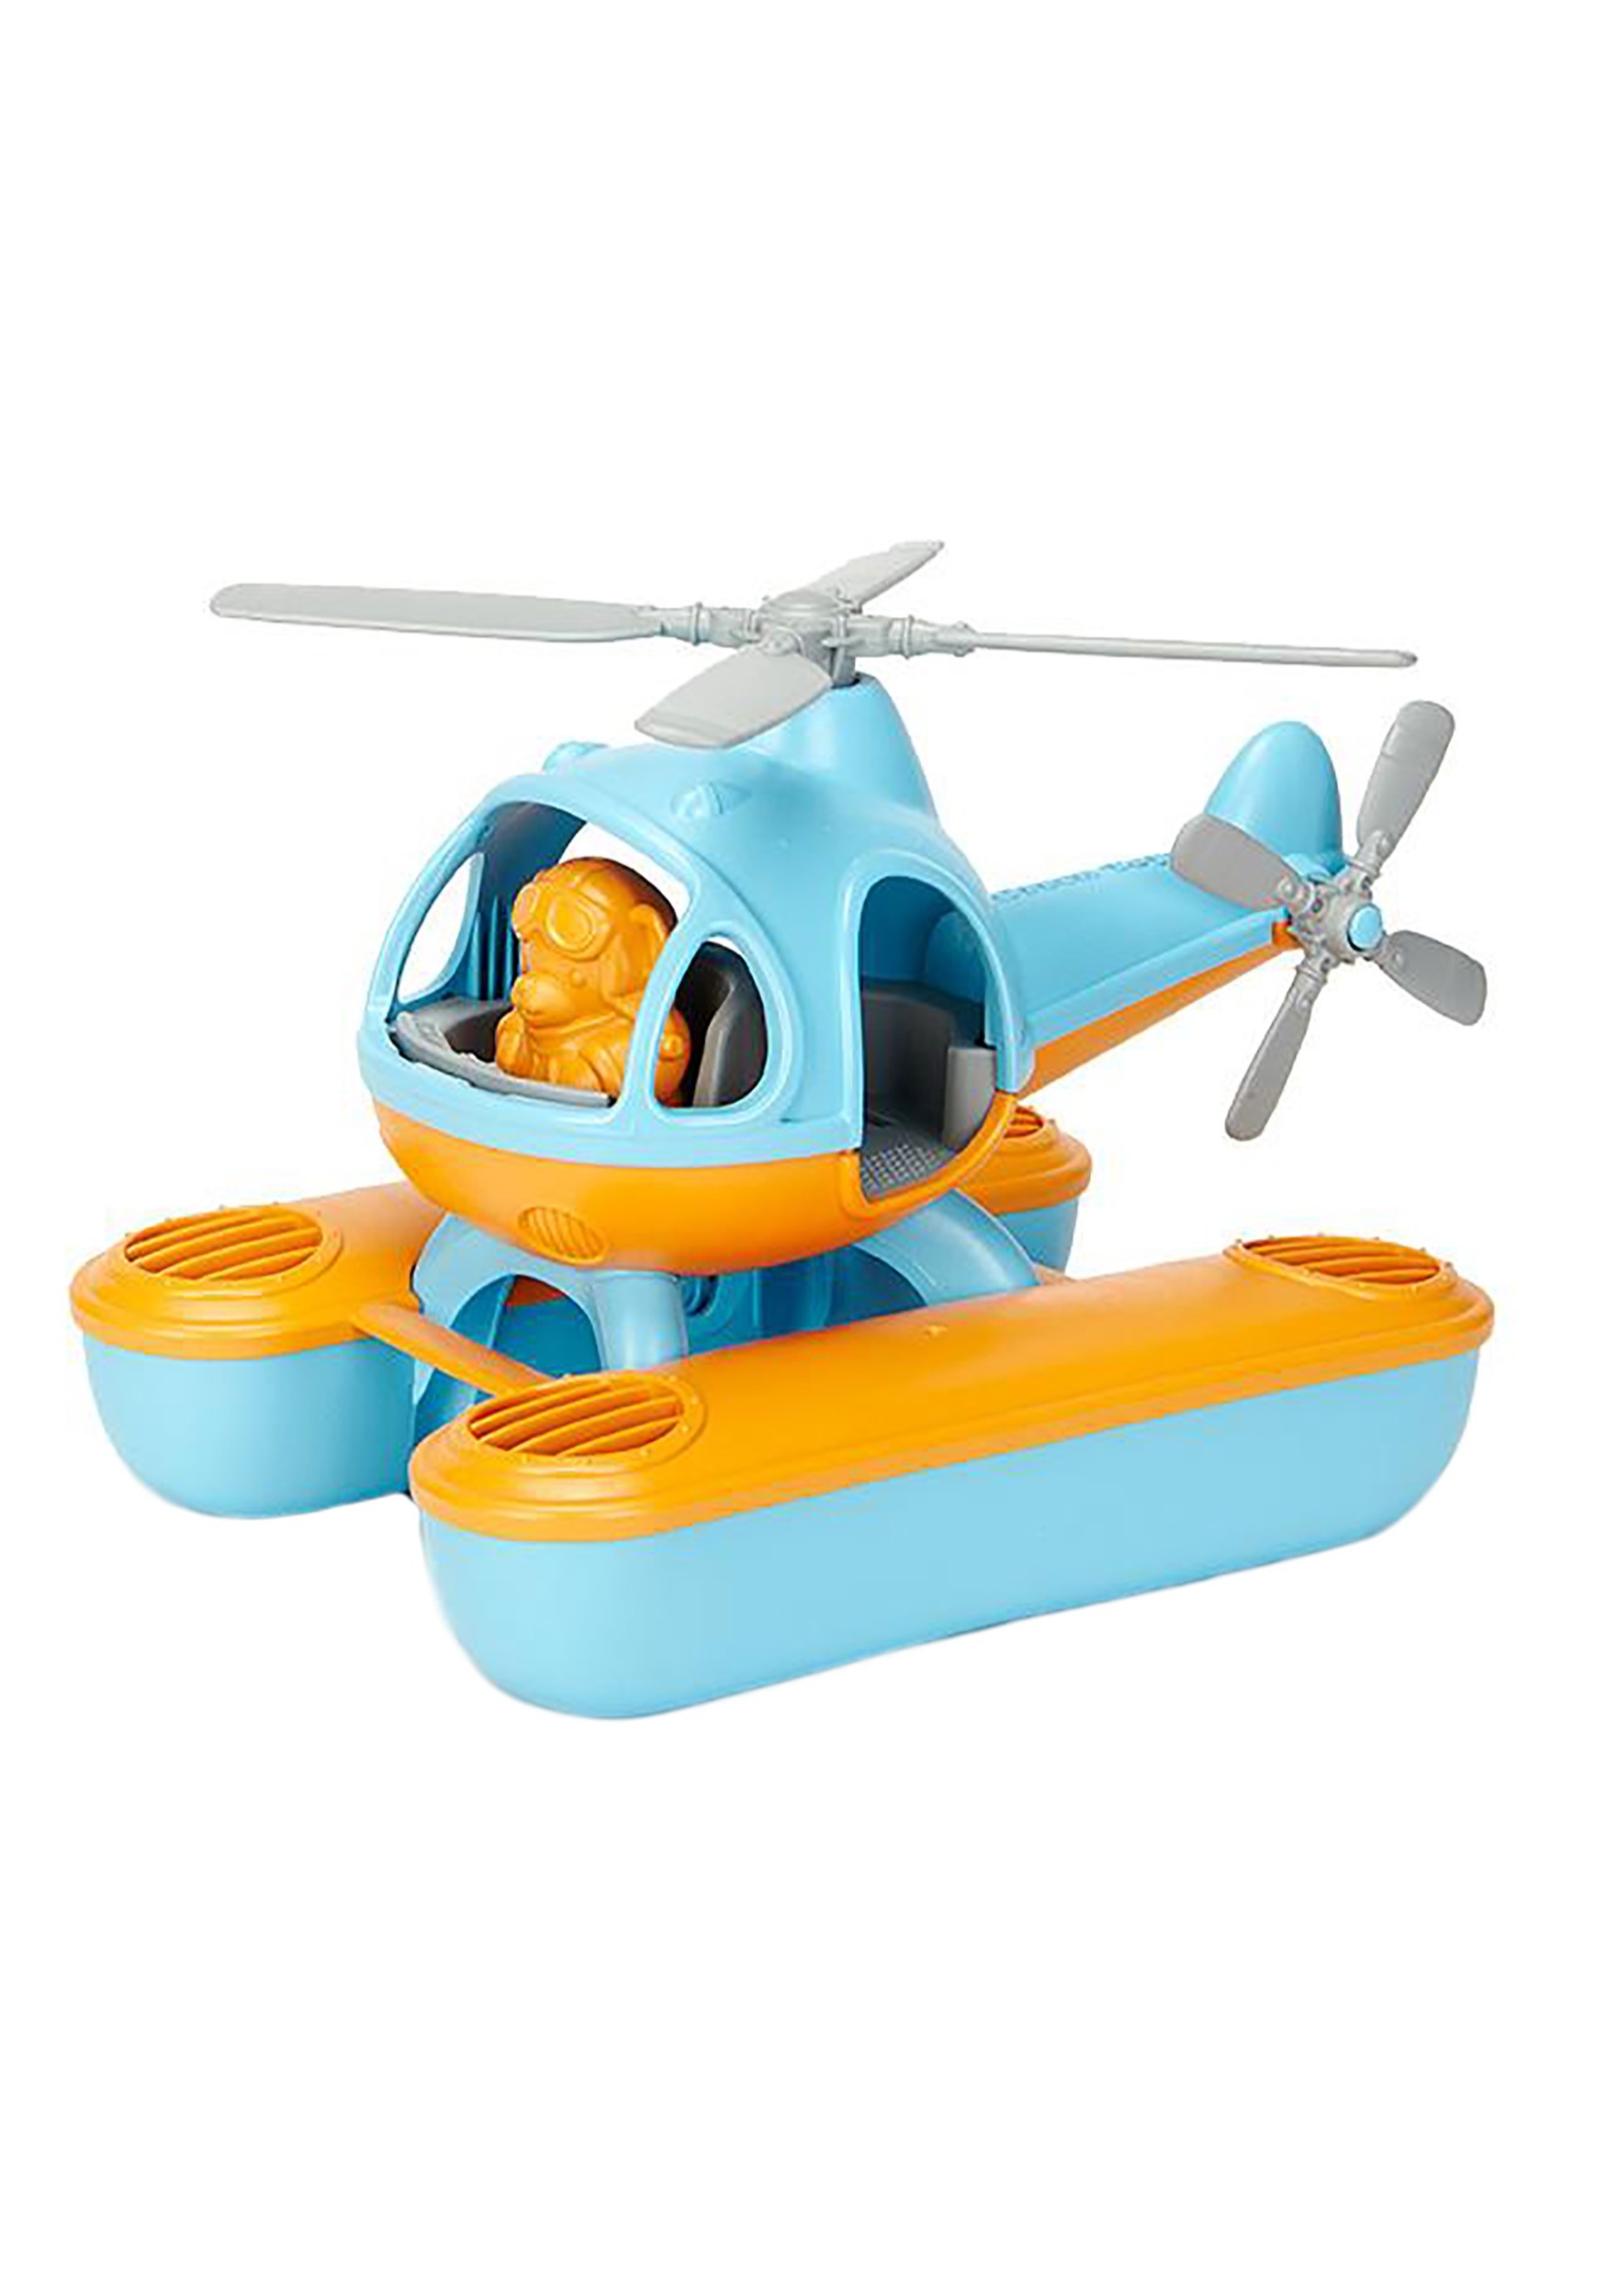 Blue Sea Copter from Green Toys